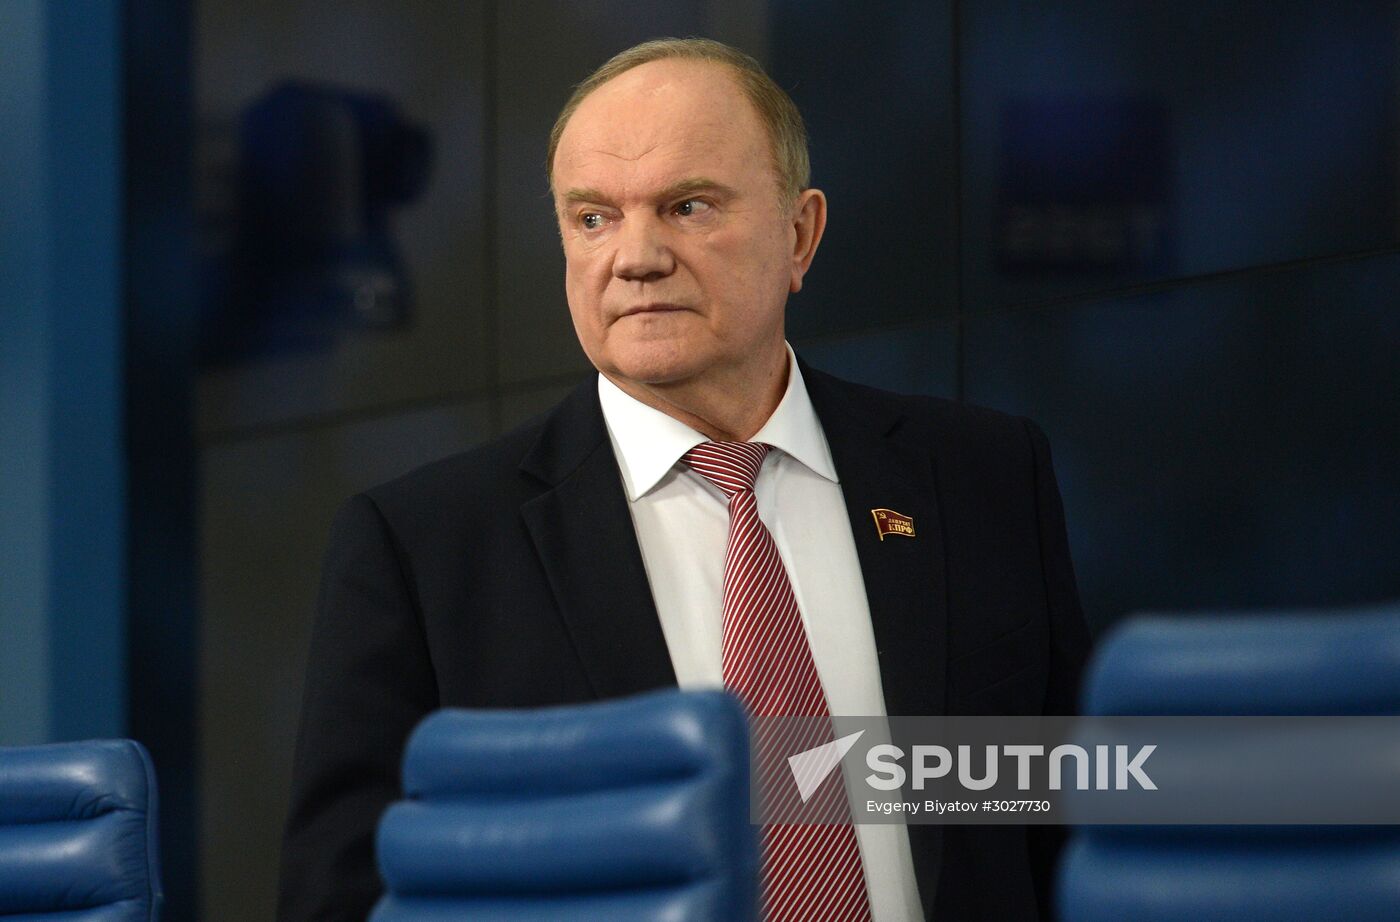 Press conference on release of Gennady Zyuganov's book "The Time to Choose, the Time to Act"